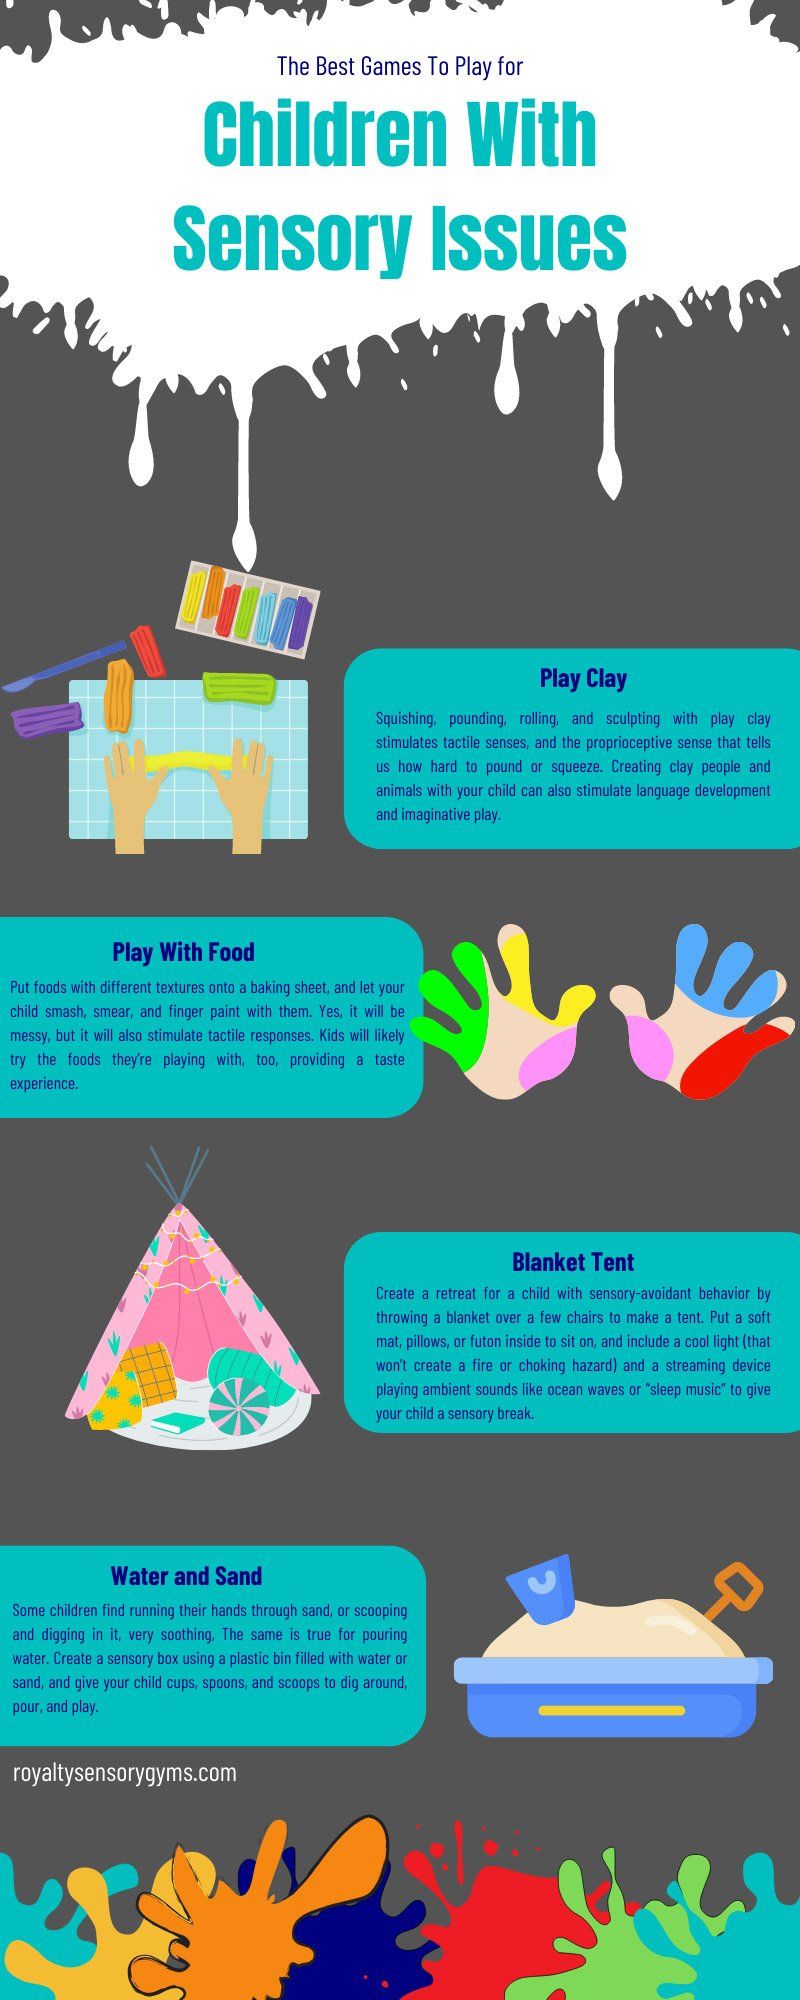 The Best Games To Play for Children With Sensory Issues